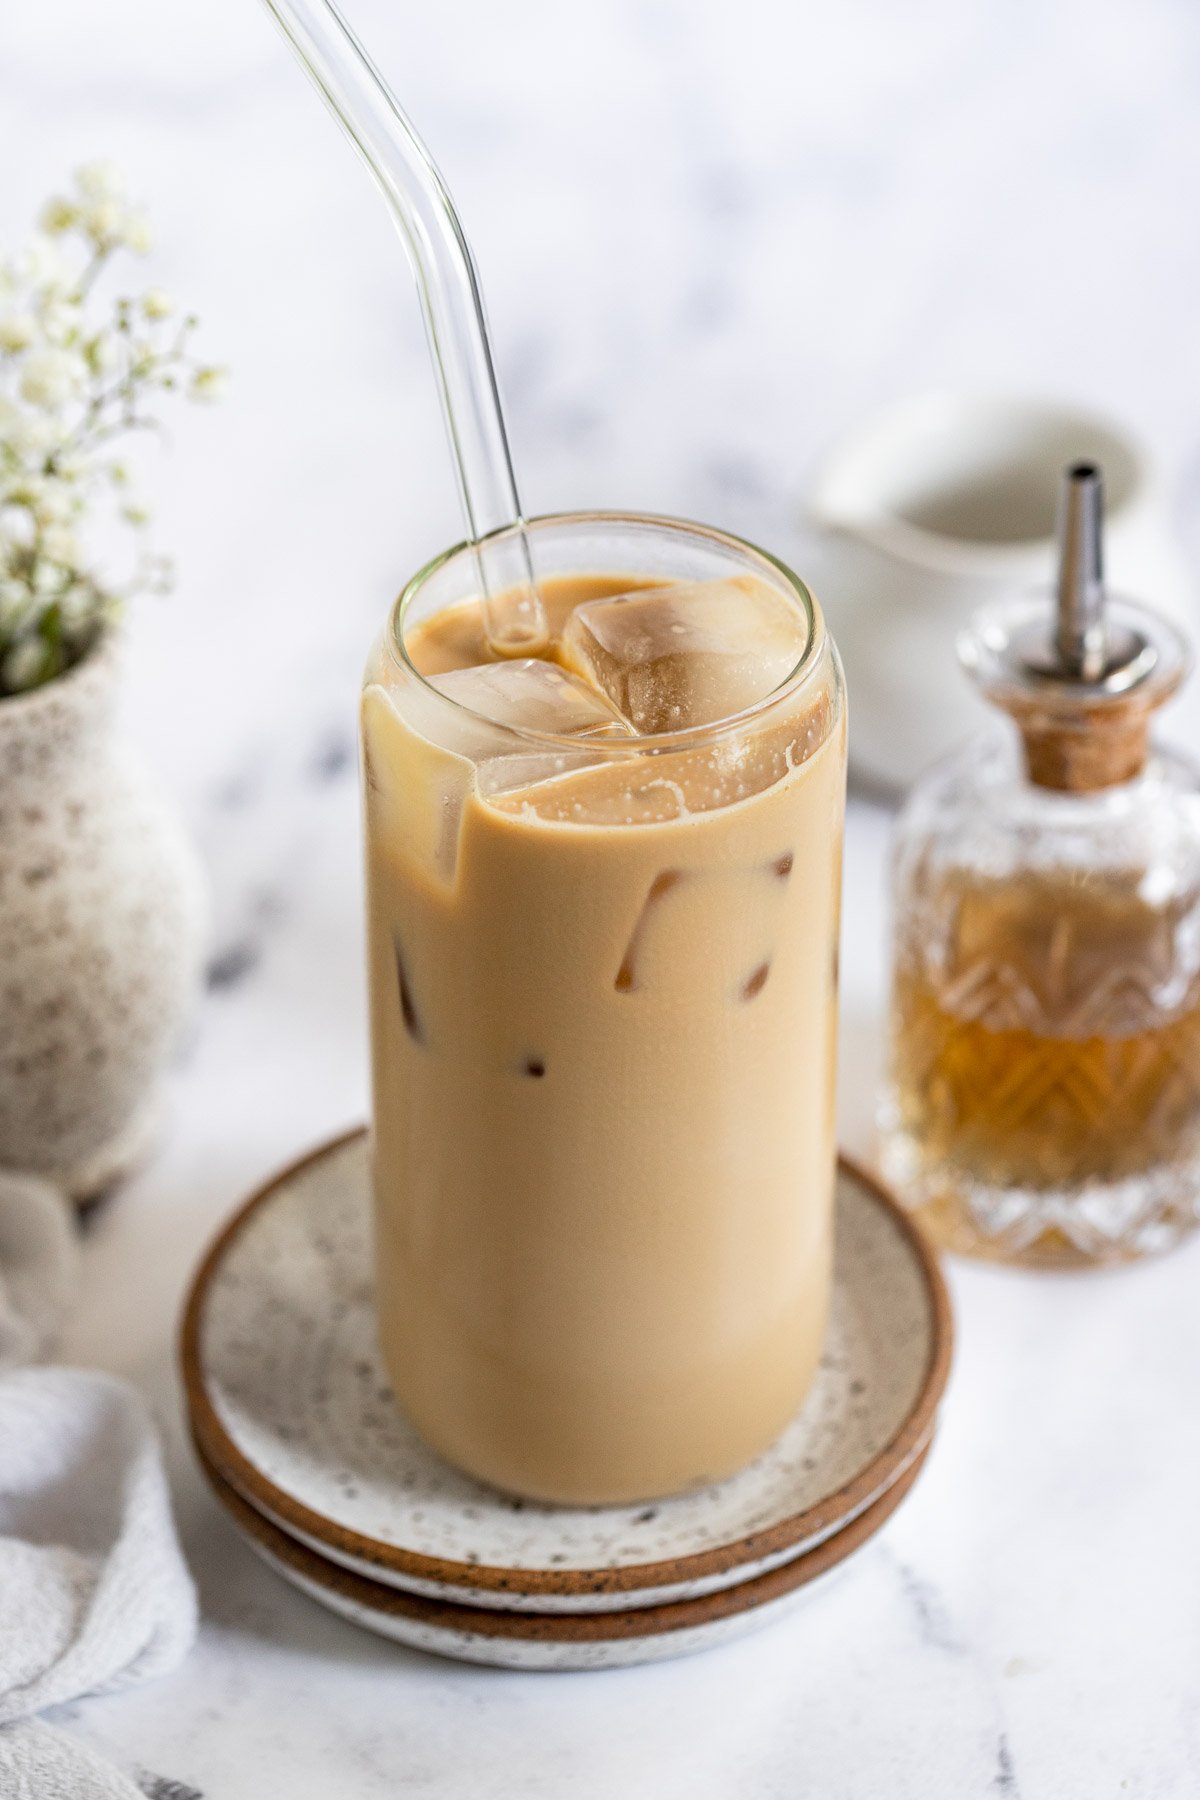 Iced Coffee Recipes, Limited Edition